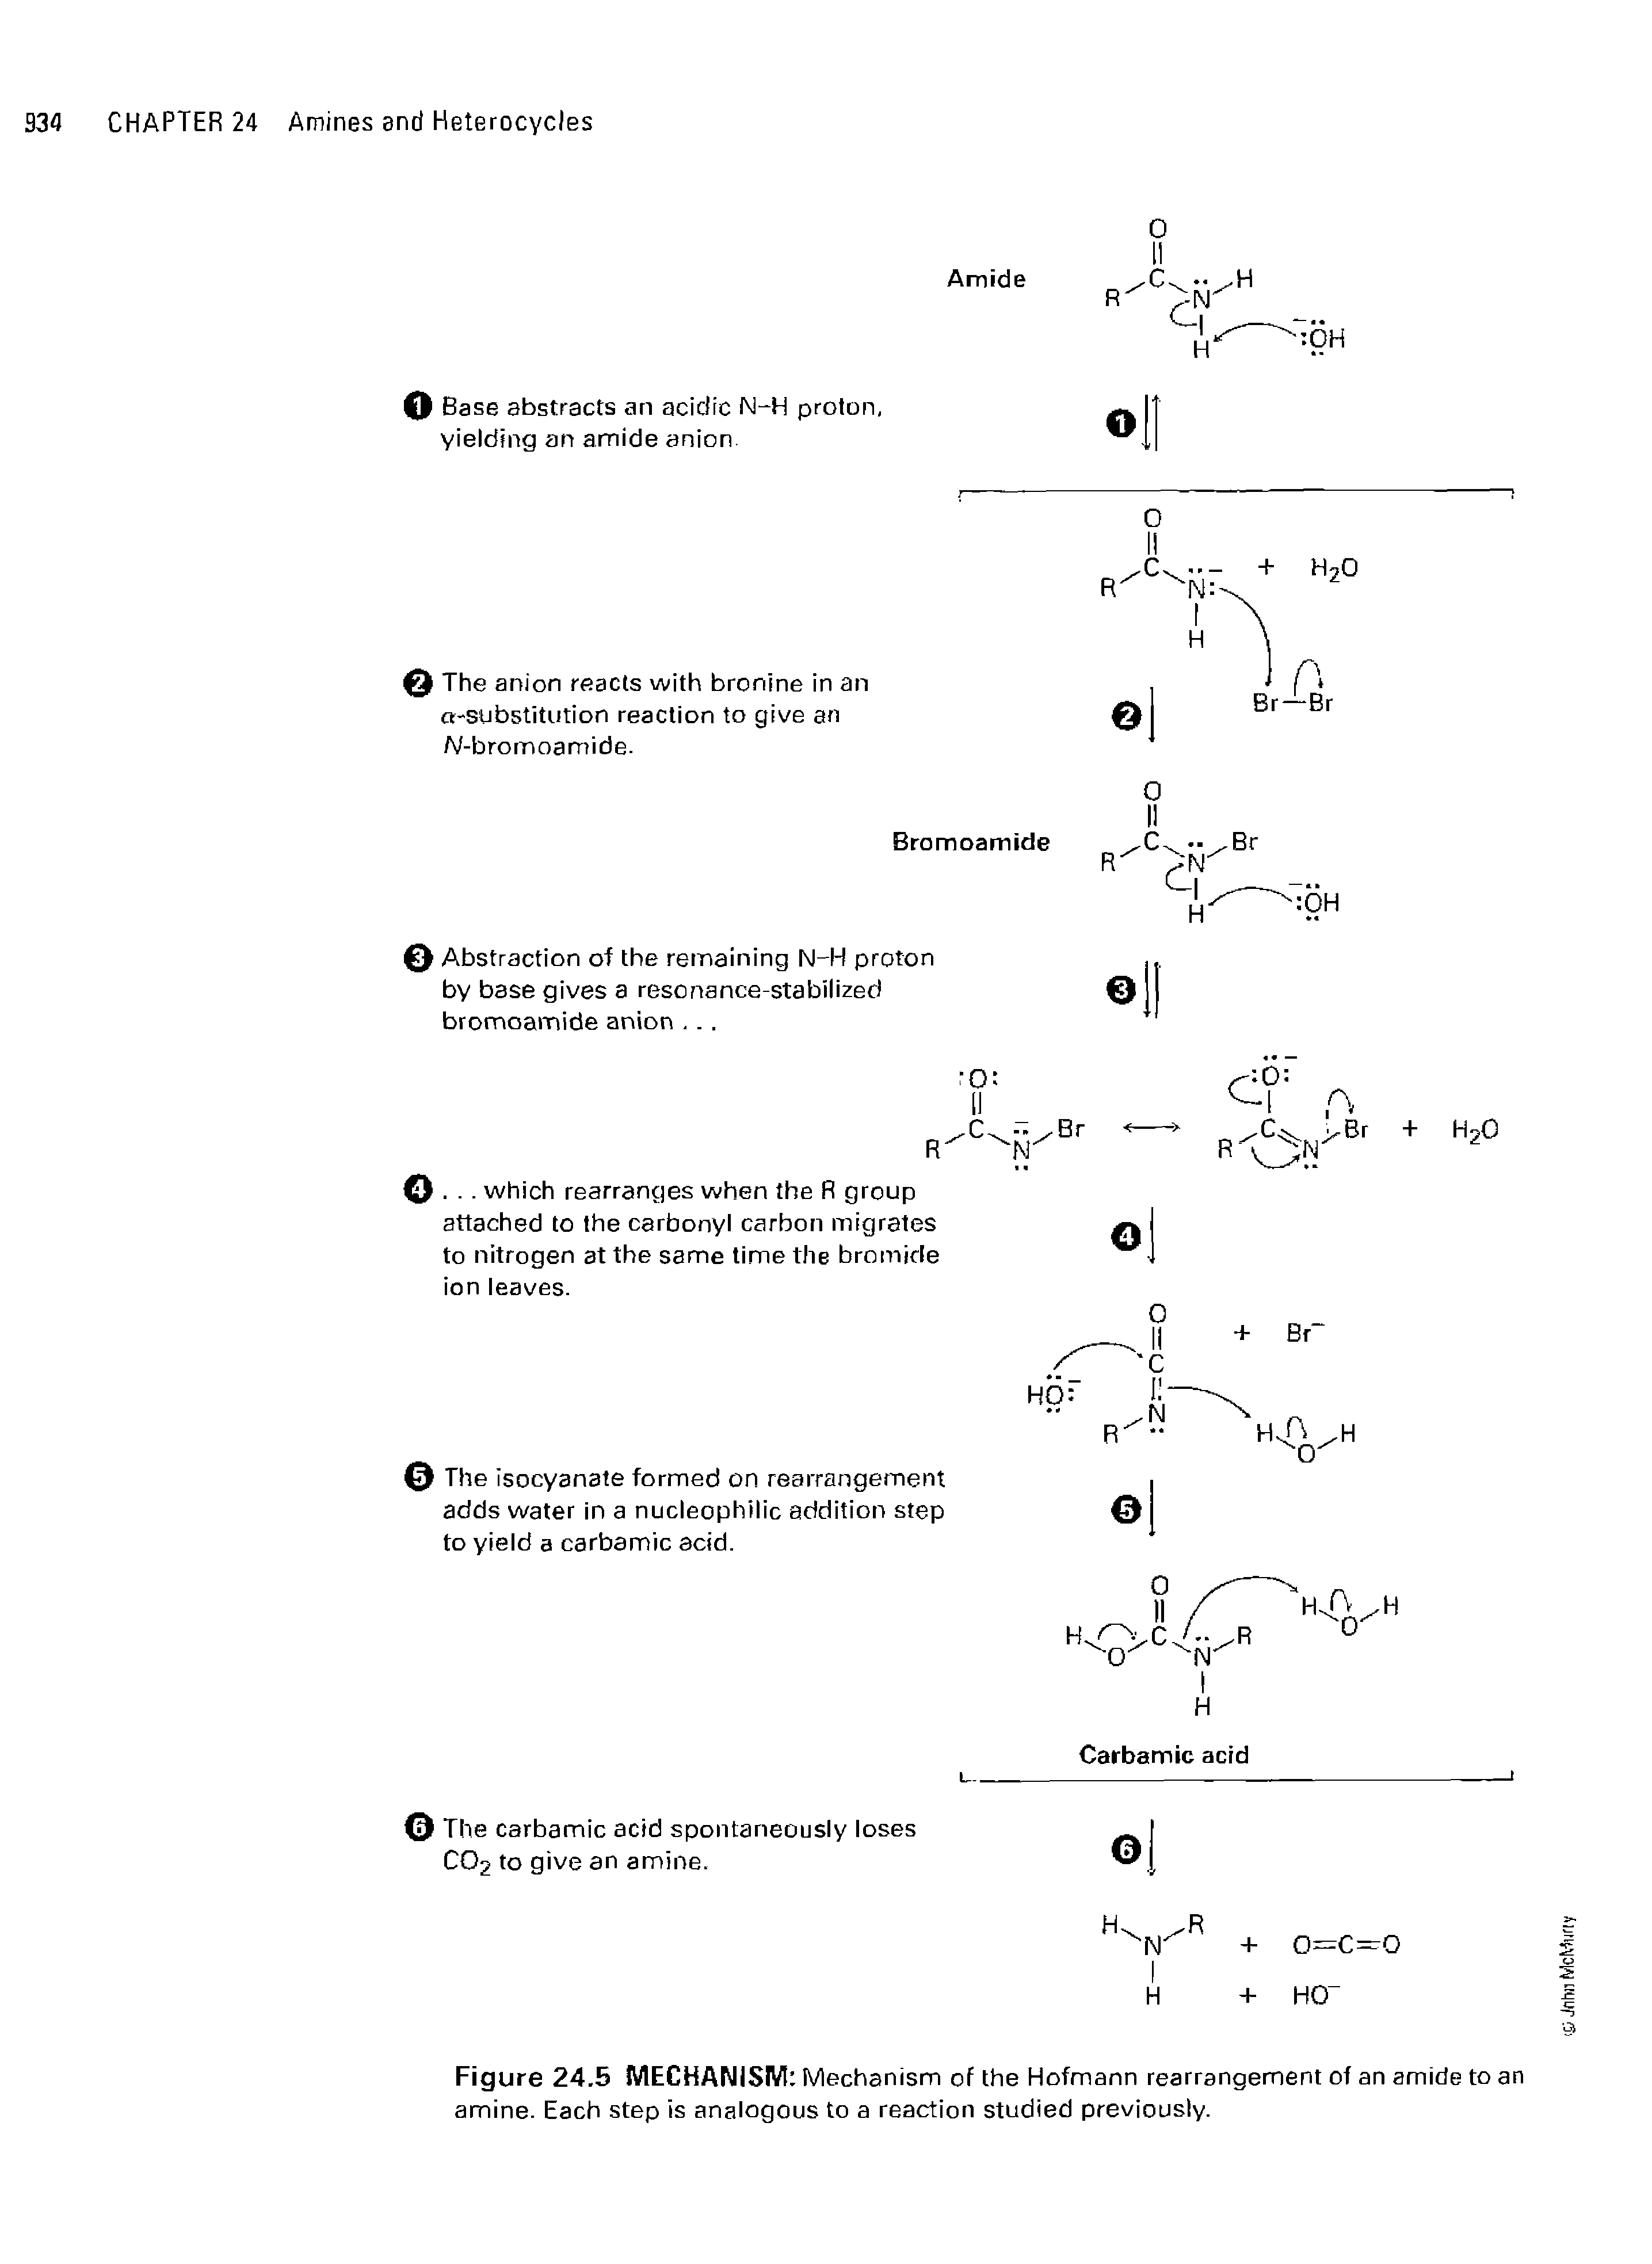 Figure 24.5 MECHANISM Mechanism of the Hofmann rearrangement of an amide to an amine. Each step is analogous to a reaction studied previously.